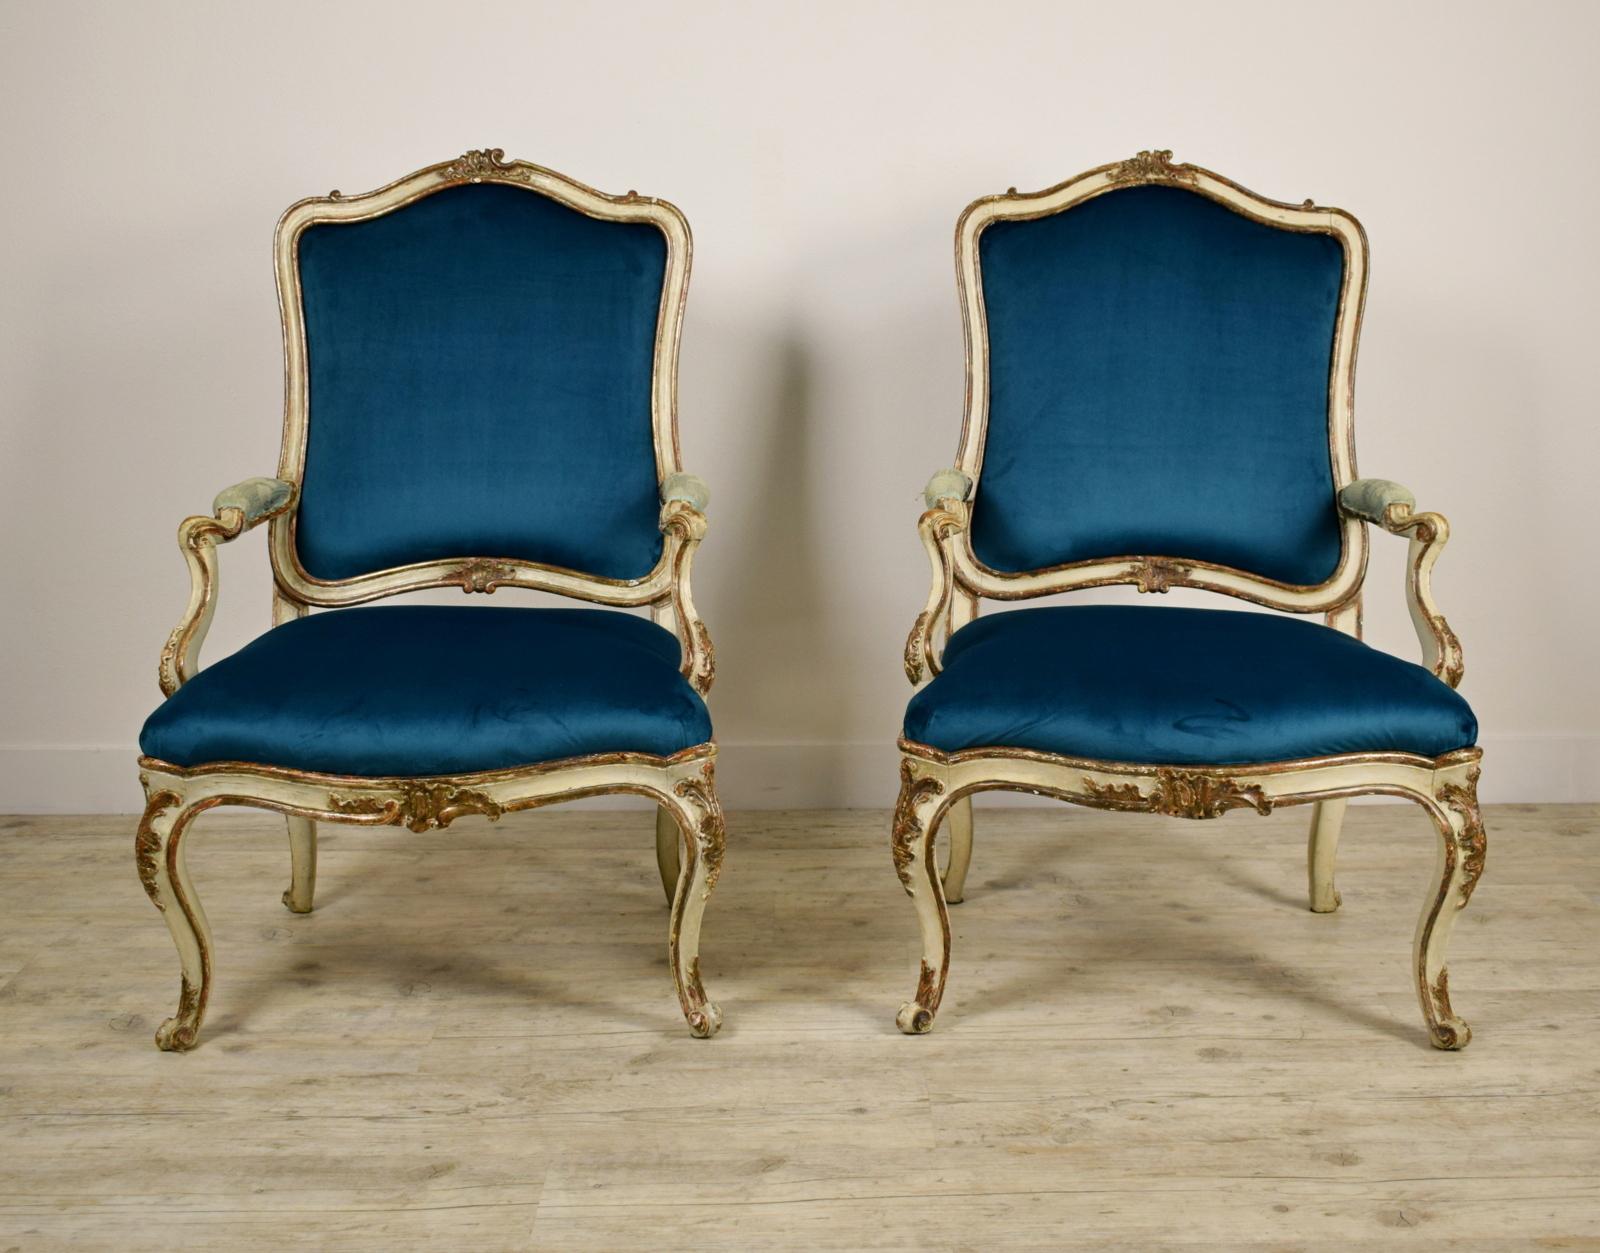 18th century, pair of Italian lacquered silver carved wood armchairs

This elegant pair of armchairs, made in the north of Italy (Piedmont) in the 18th century, has a finely carved wood structure, lacquered and silver plated.

These large